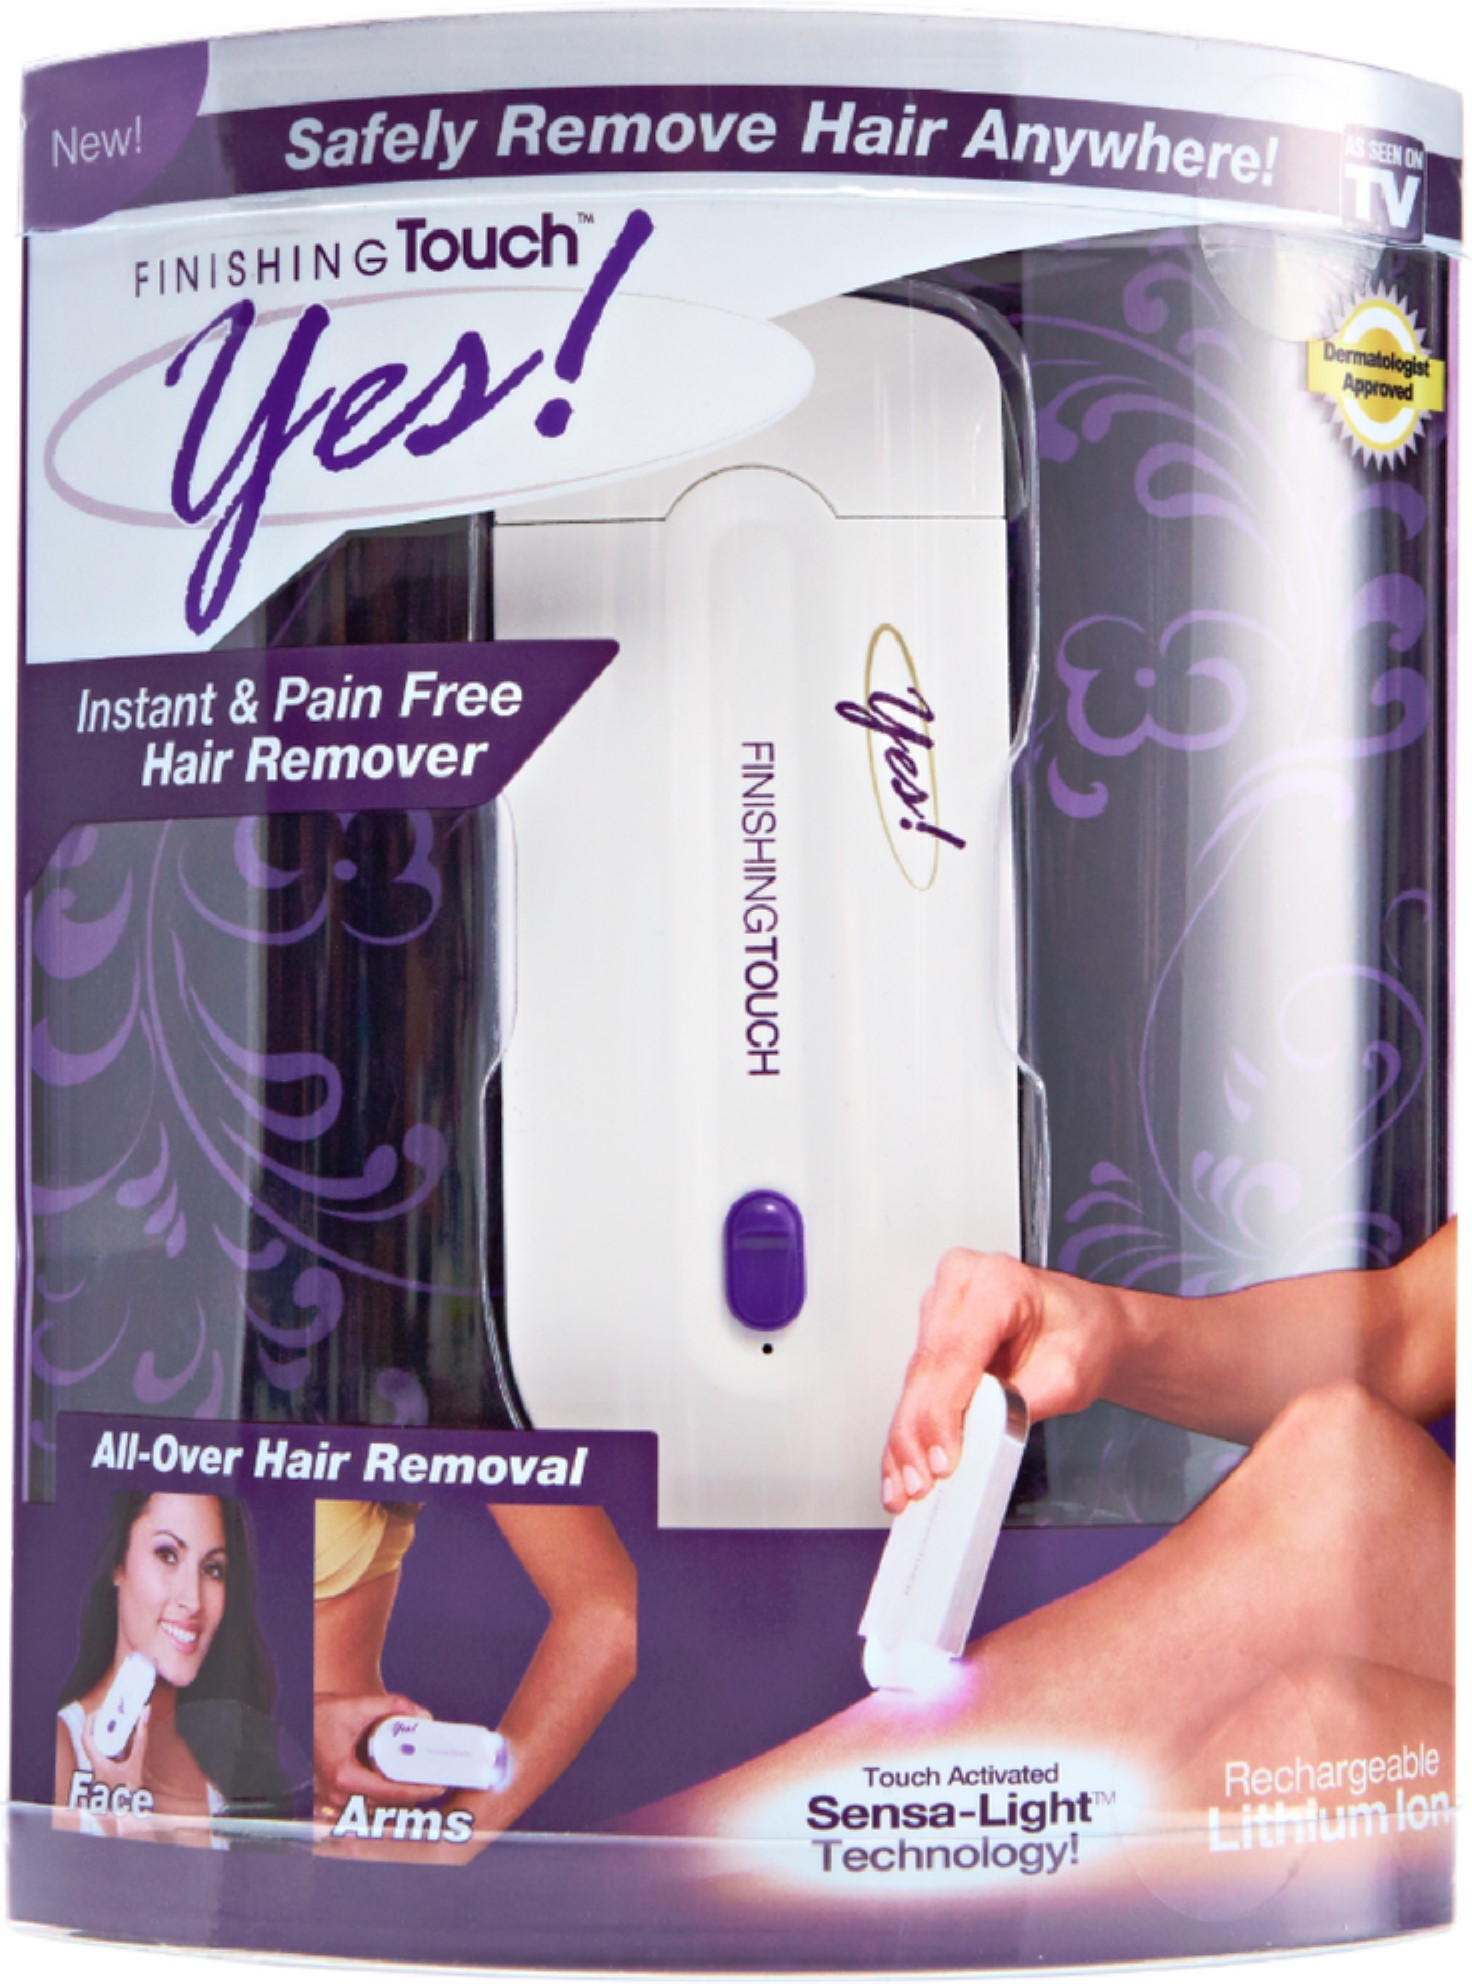 Finishing Touch Yes!, Instant & Pain Free Hair Remover - image 1 of 4